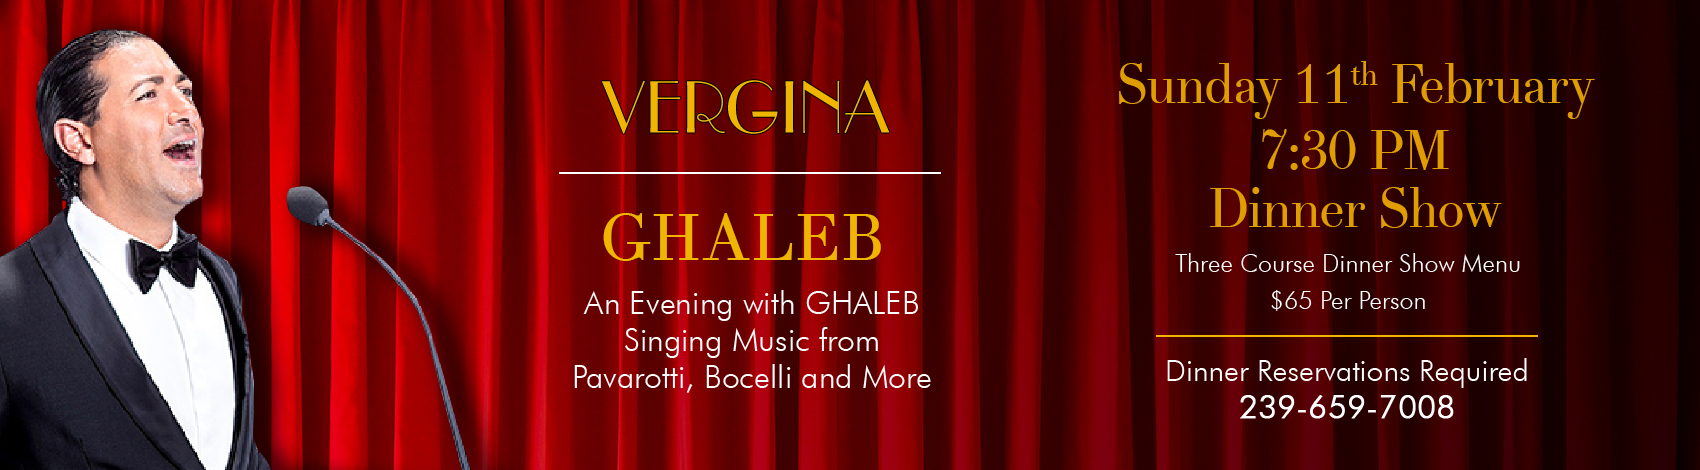 An Evening with GHALEB Singing Music from Pavarotti, Bocelli and More February 11th 7:30 PM Dinner Show Three Course Dinner Show Menu $65 Per Person, tax, beverage, and gratuity are additional